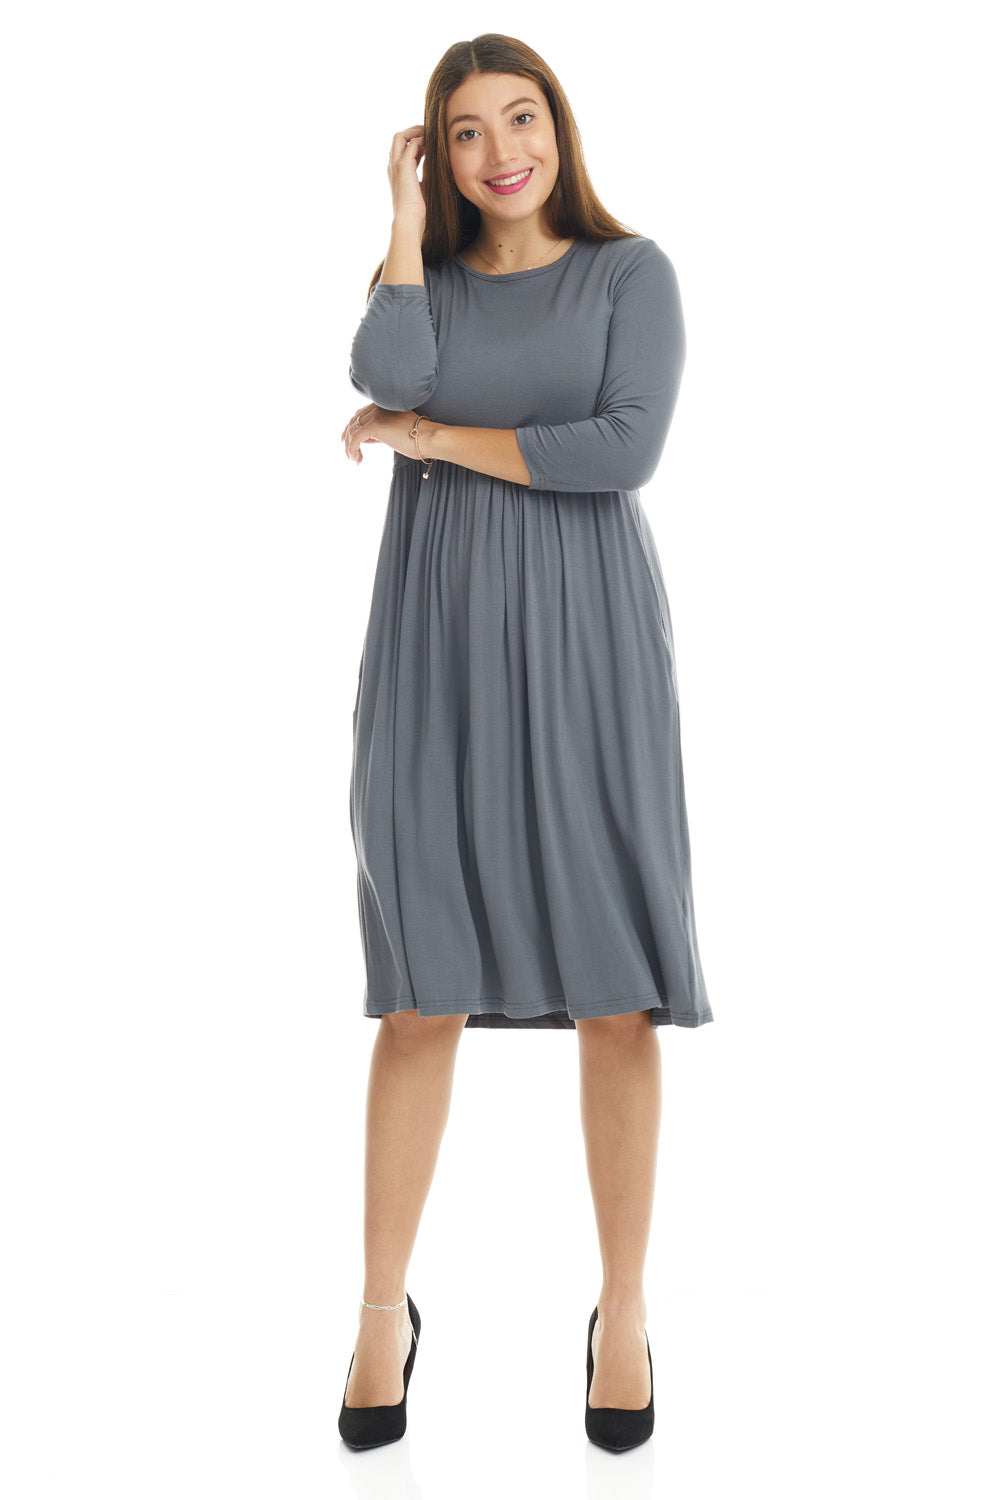 grey 3/4 sleeve below the knee swing dress with empire waist and side pockets